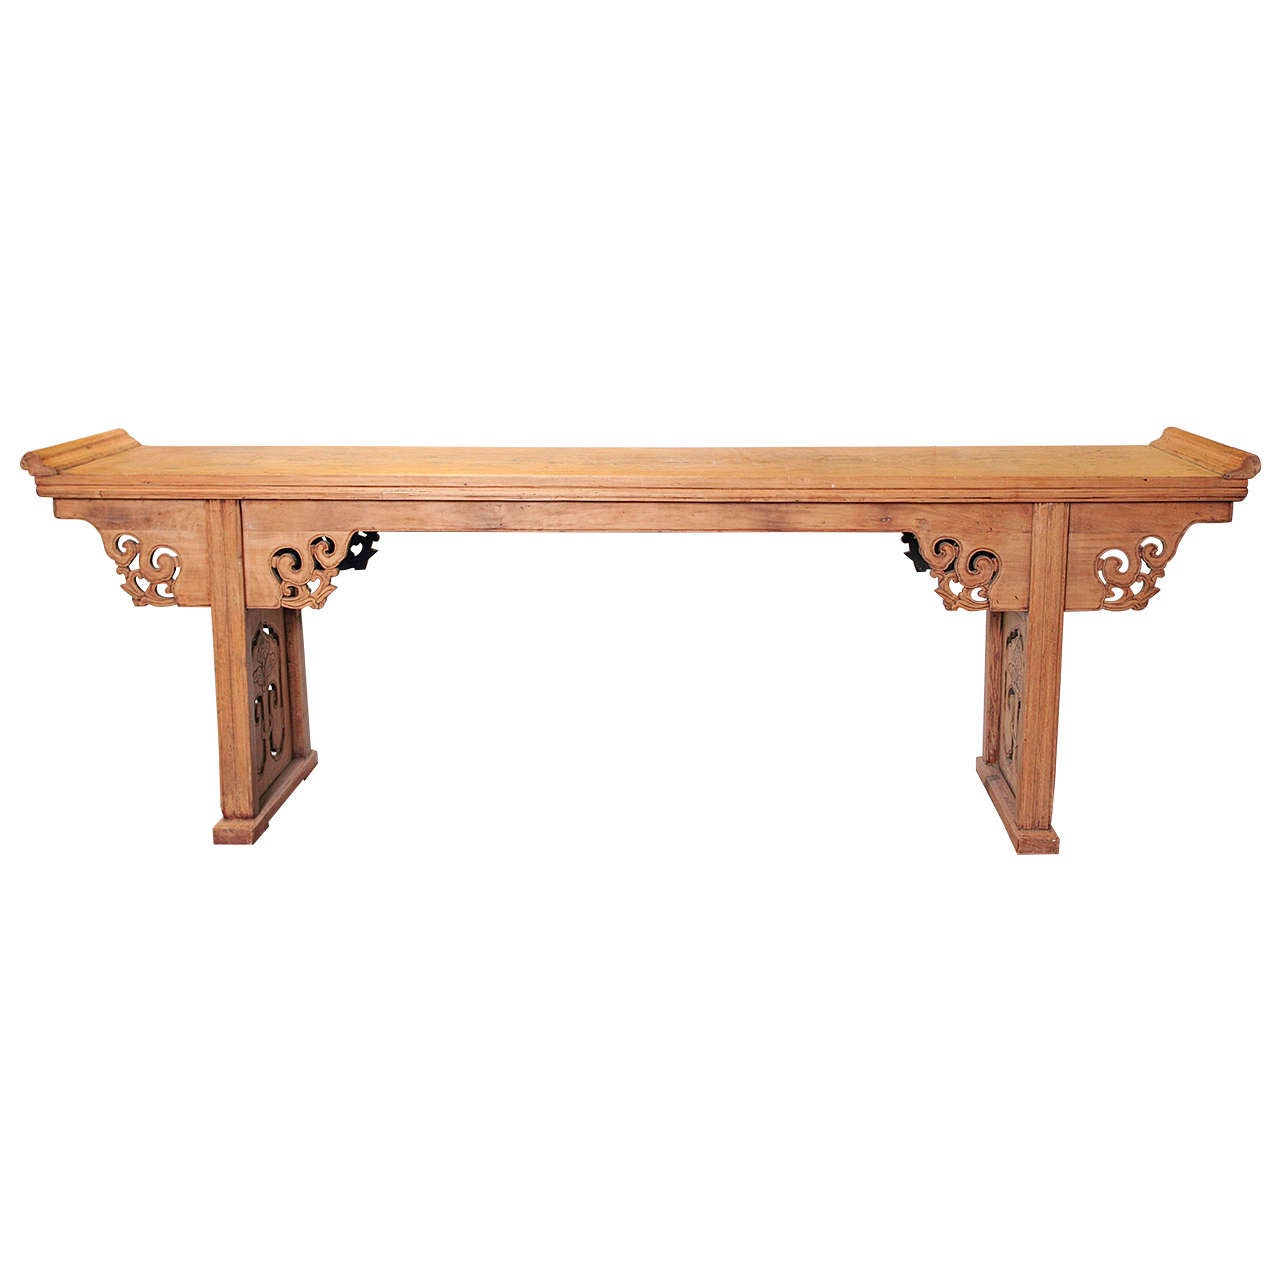 19th Century Chinese Bleached Elmwood Altar Table